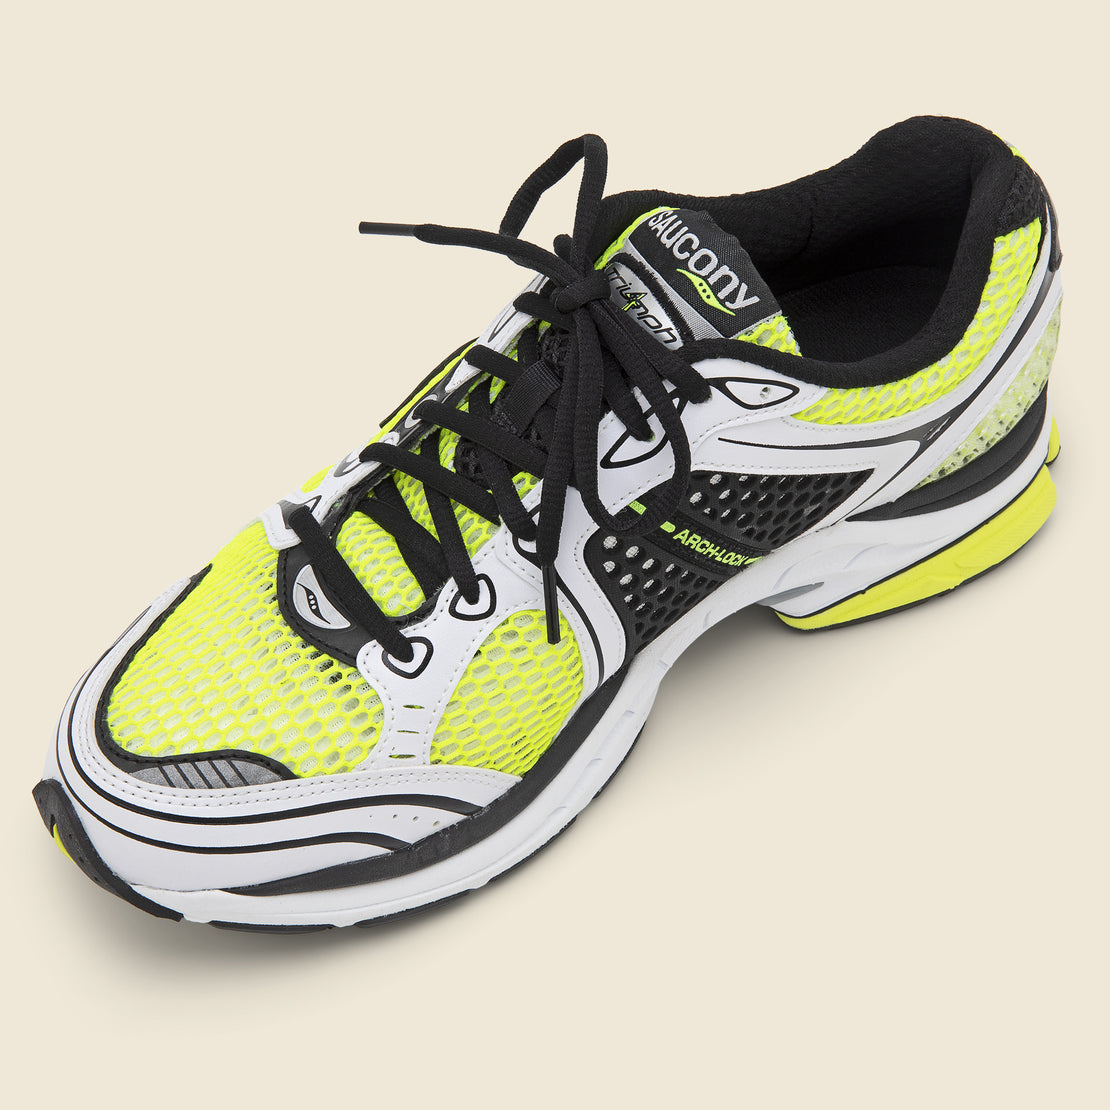 Progrid Triumph 4 OG Sneaker - Neon - Saucony - STAG Provisions - Shoes - Athletic